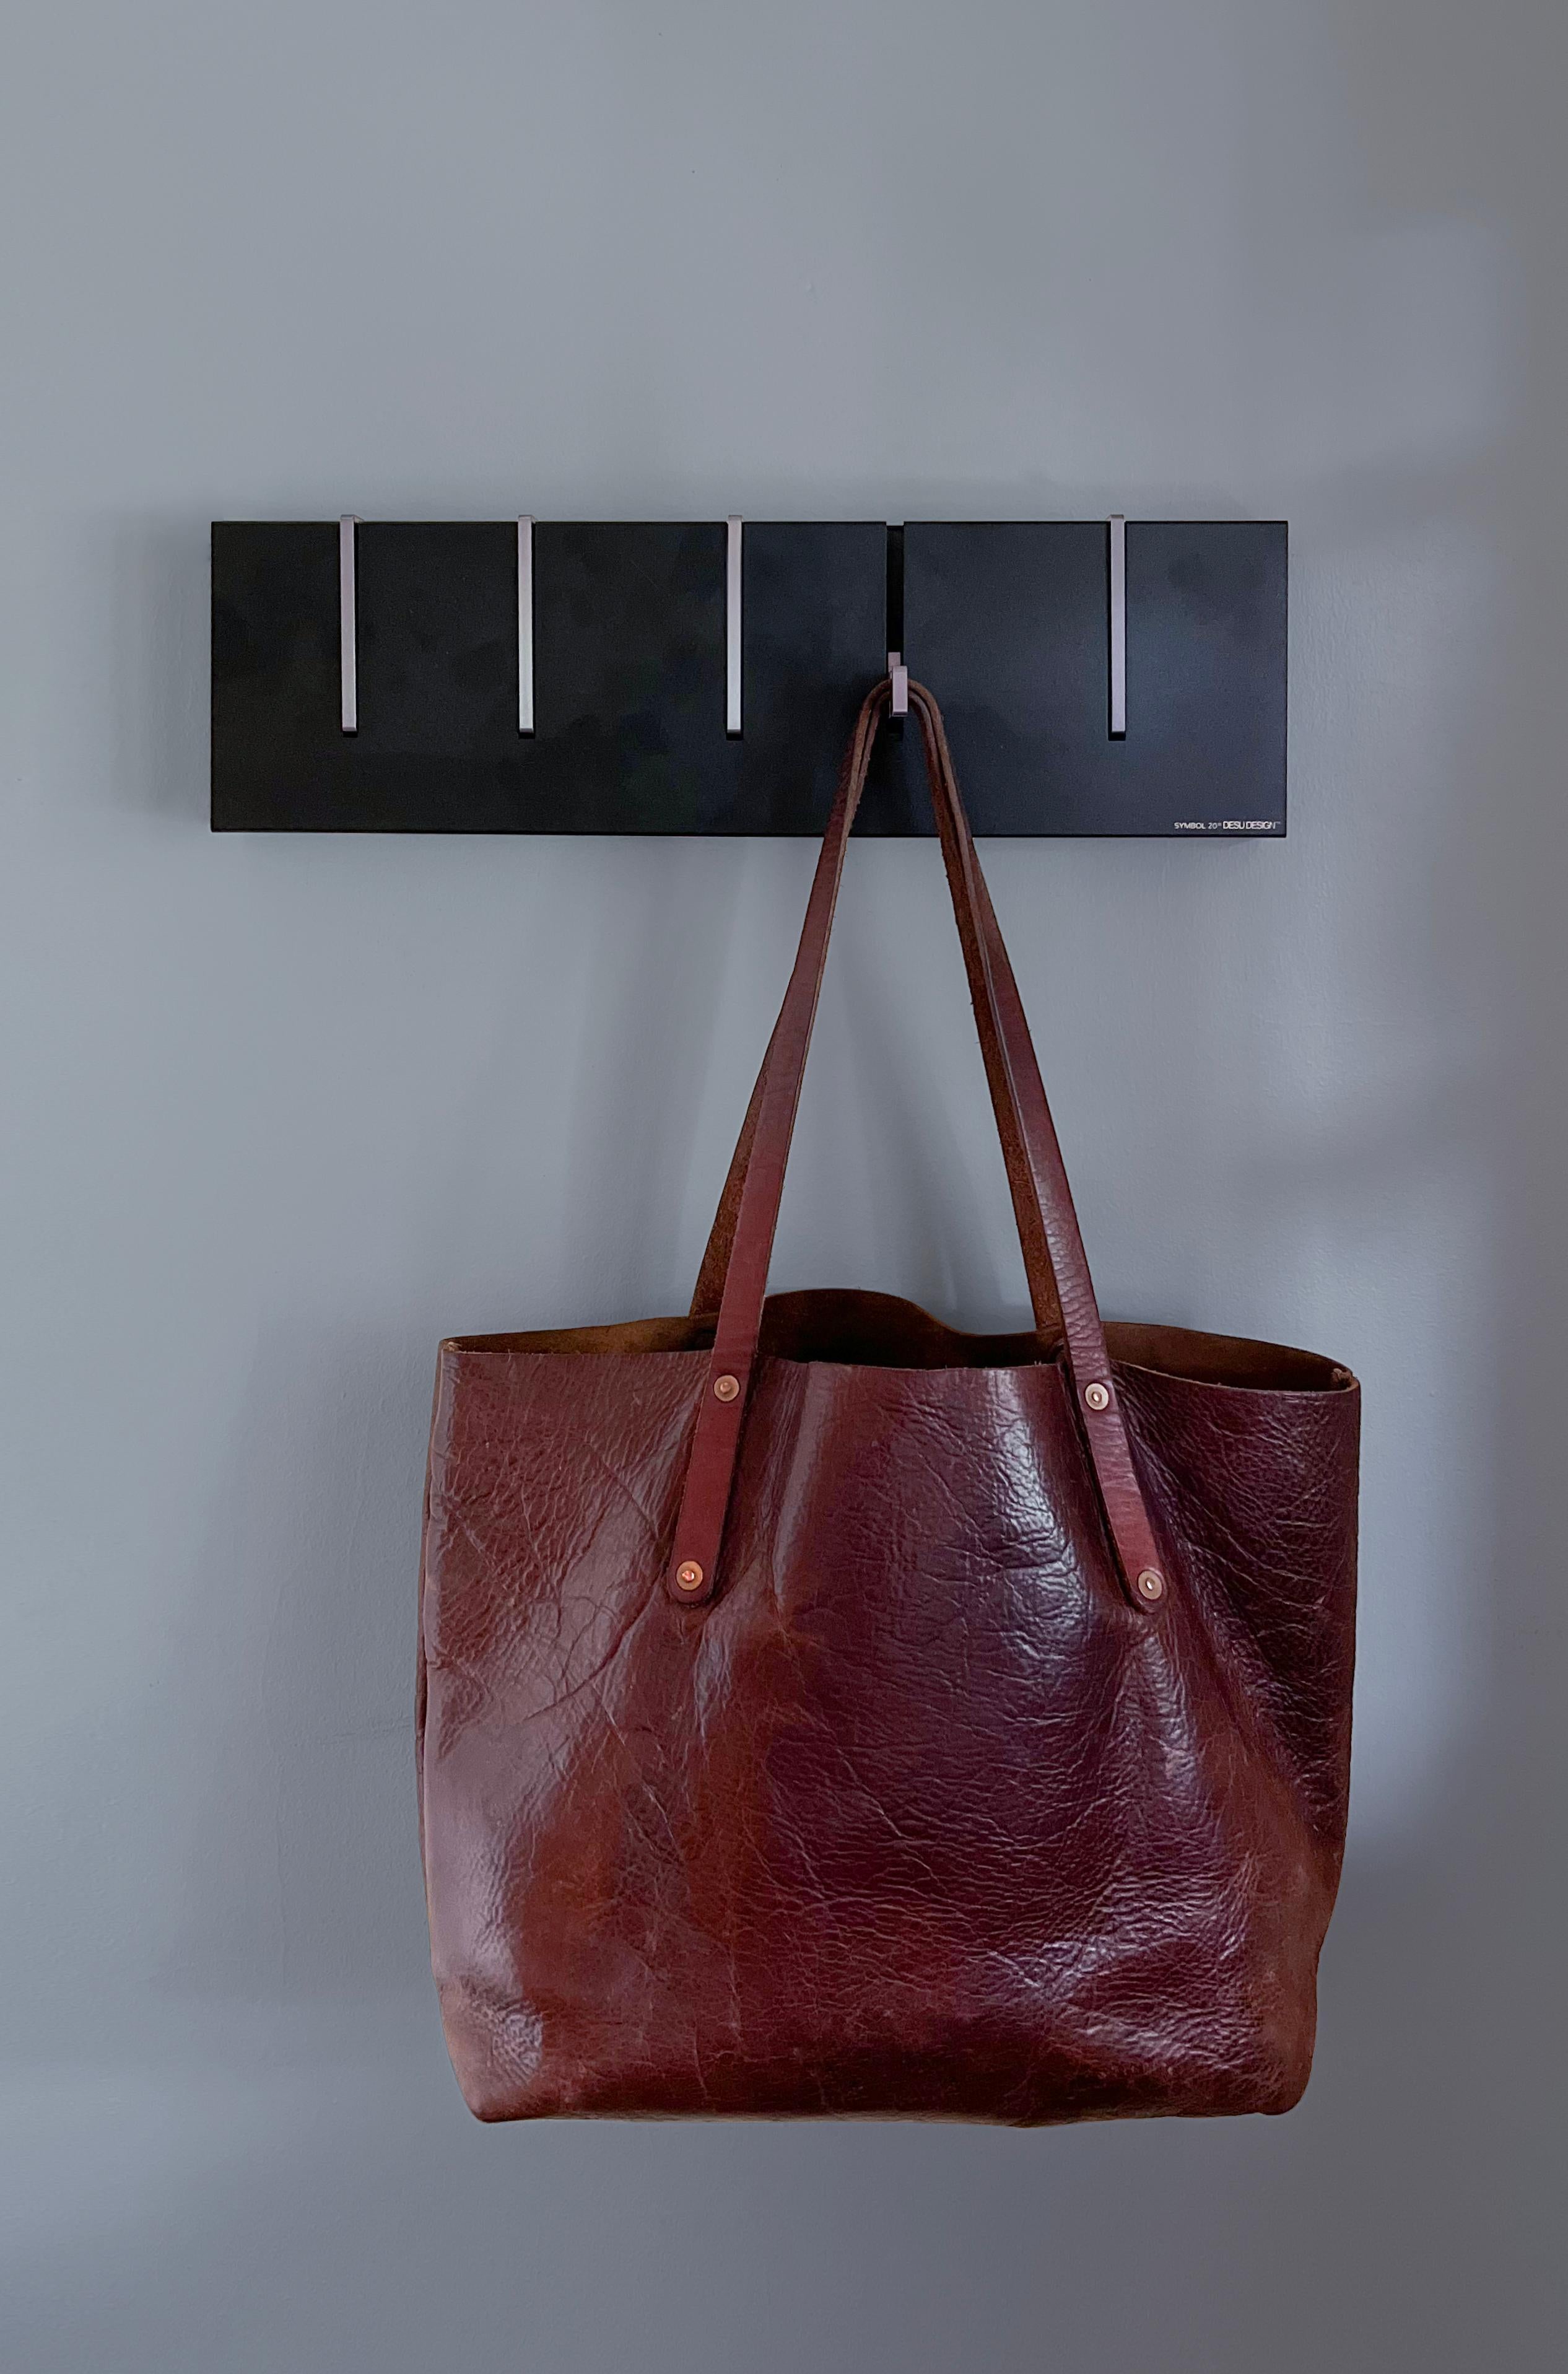 The Symbol 20 offers everything our classic symbol coat rack does, now in a shorter length to fit in more places. This modern coat rack functions both a practical storage option and as wall art. During the summer months the Symbol 20 in color hangs